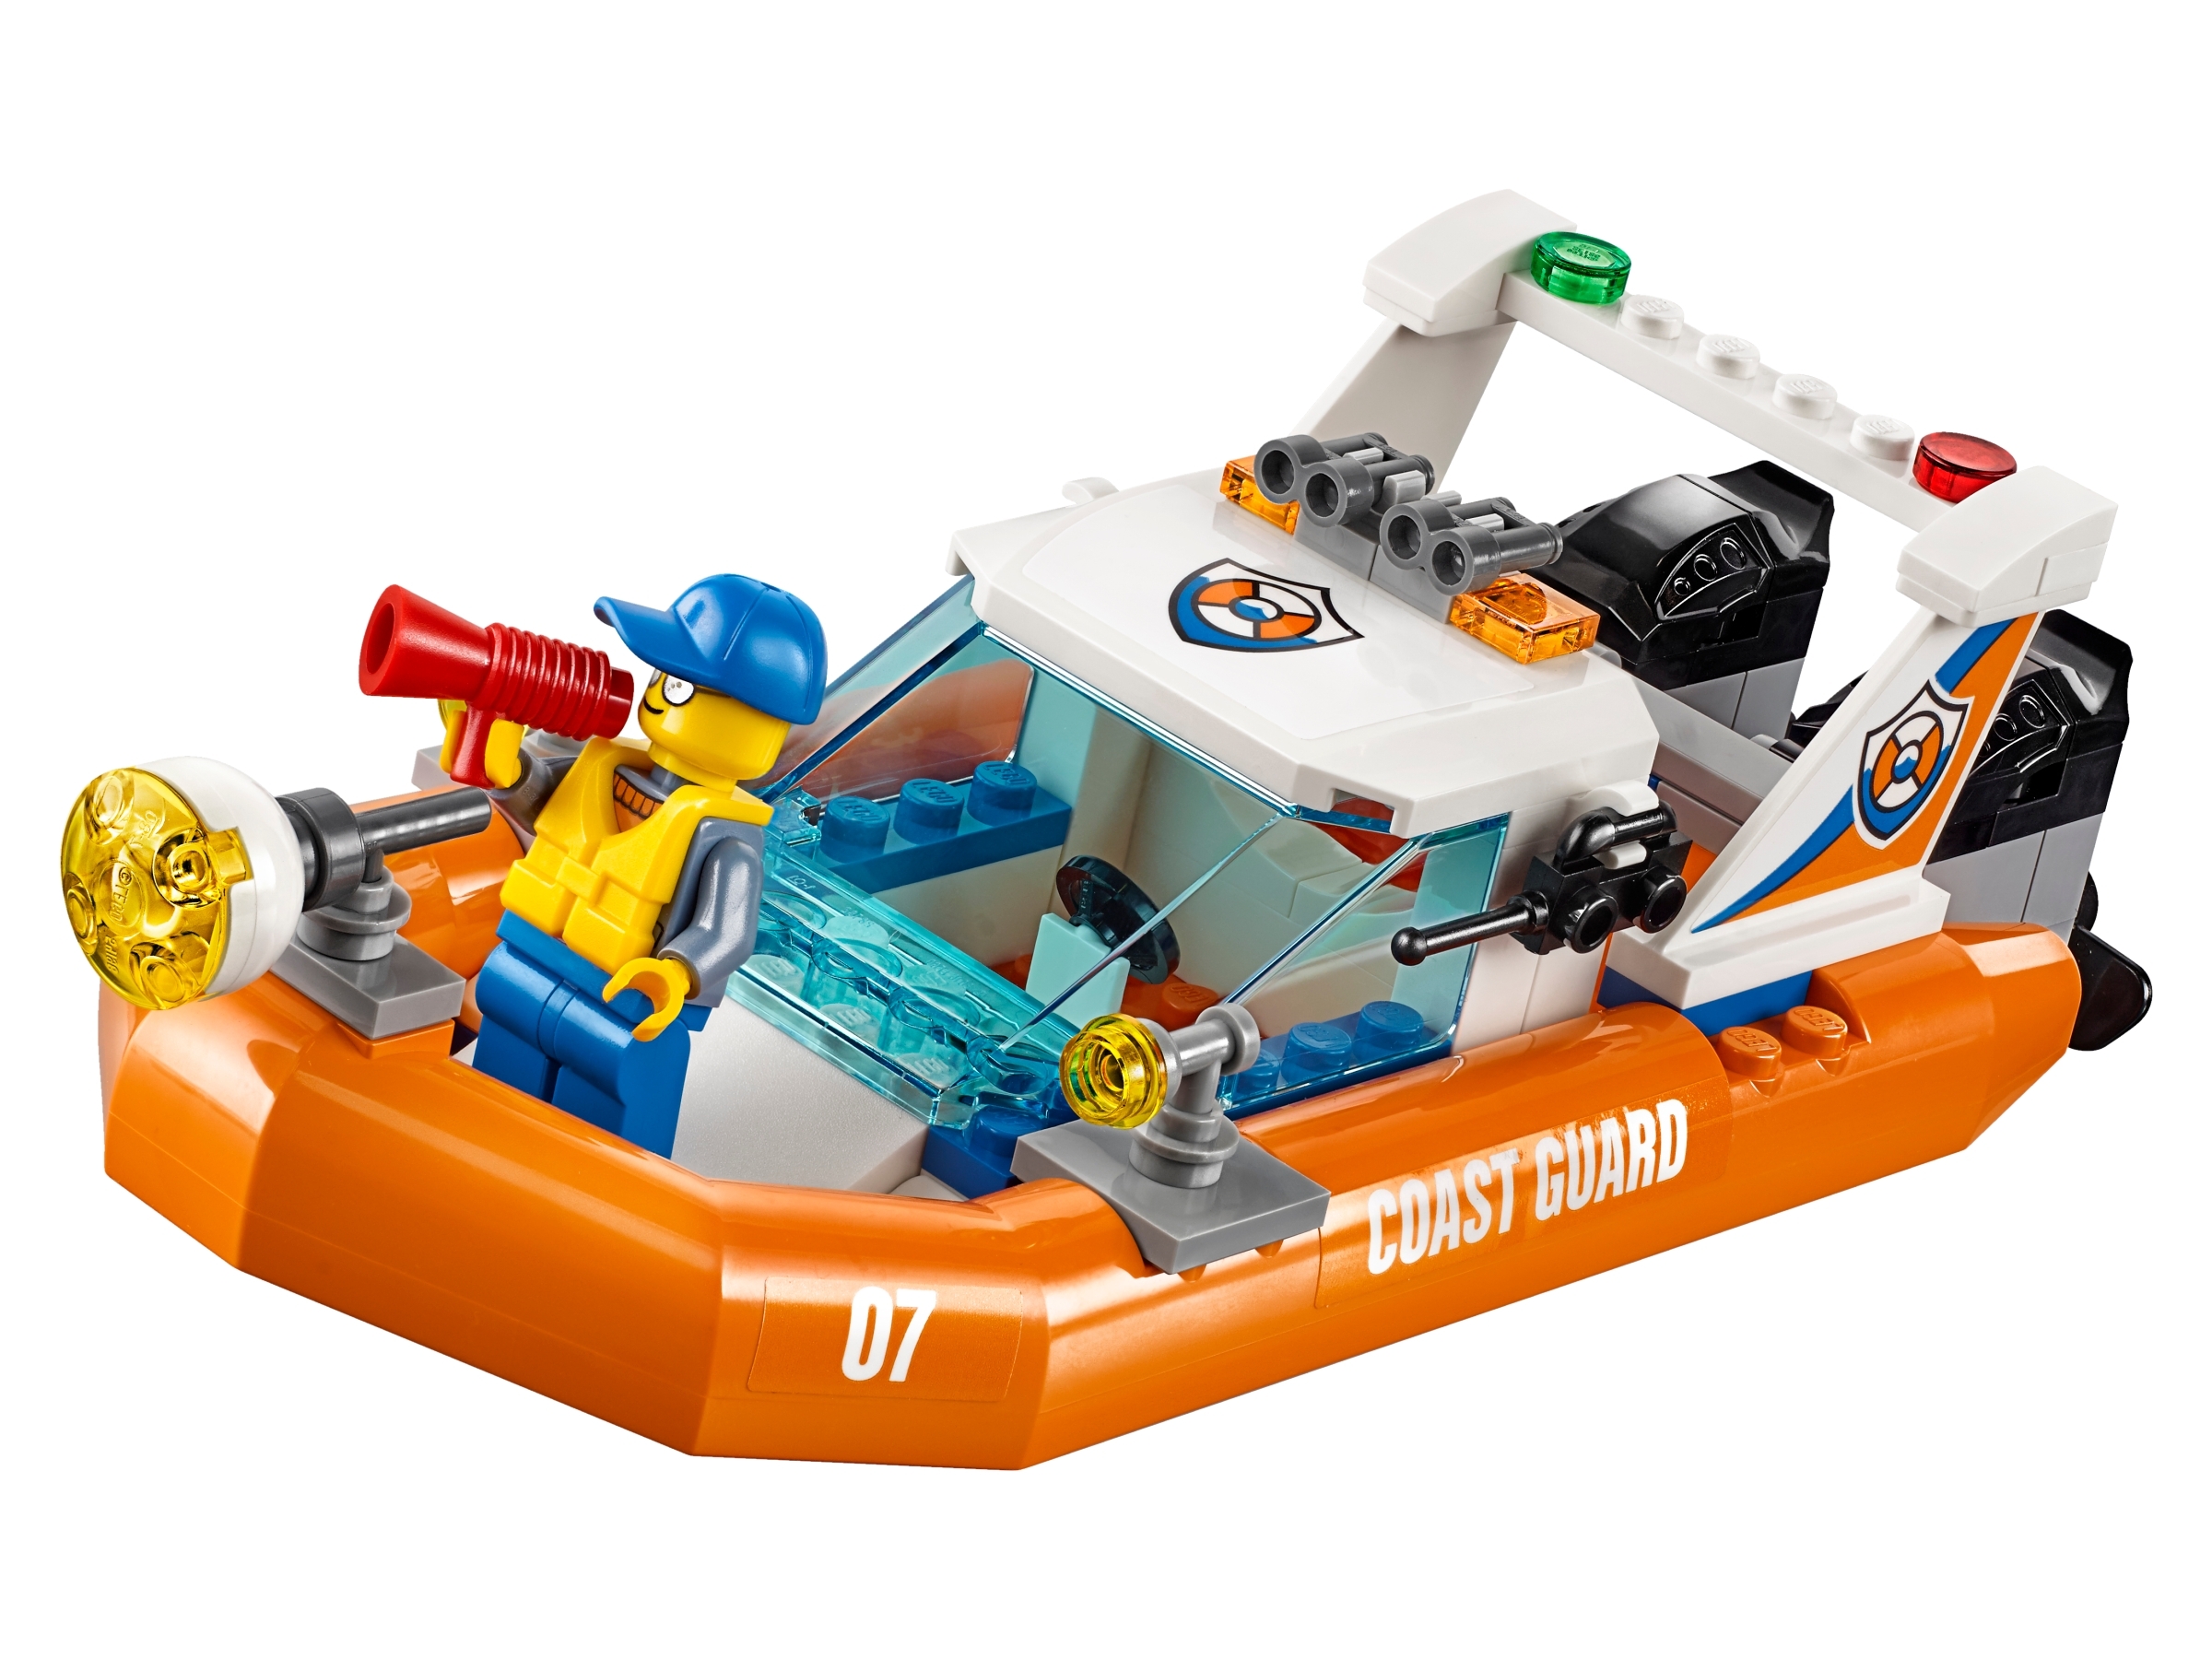 One hundred years health efficiency Sailboat Rescue 60168 | City | Buy online at the Official LEGO® Shop US